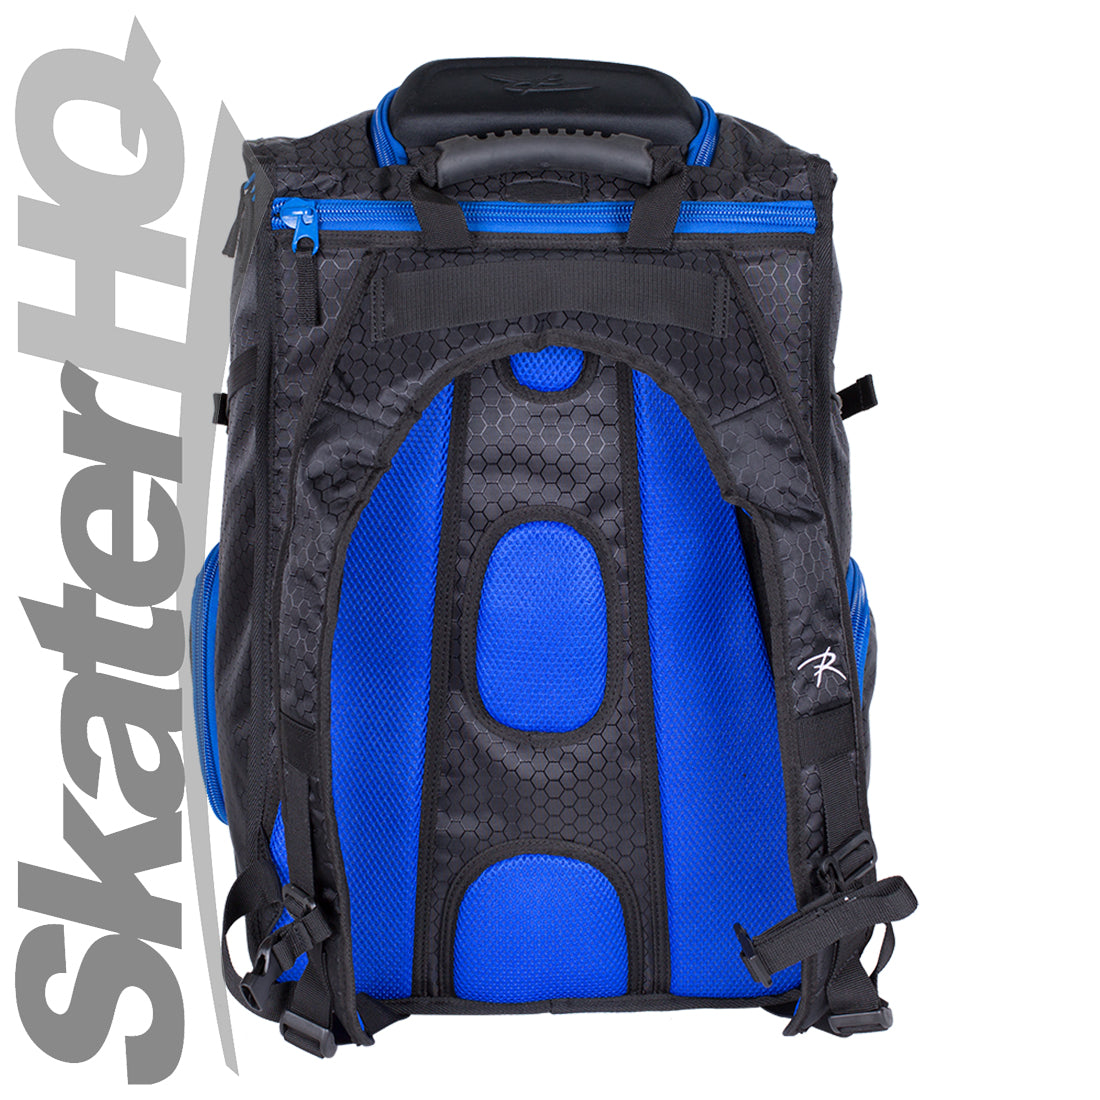 Riedell RXT Backpack - Black/Blue Bags and Backpacks